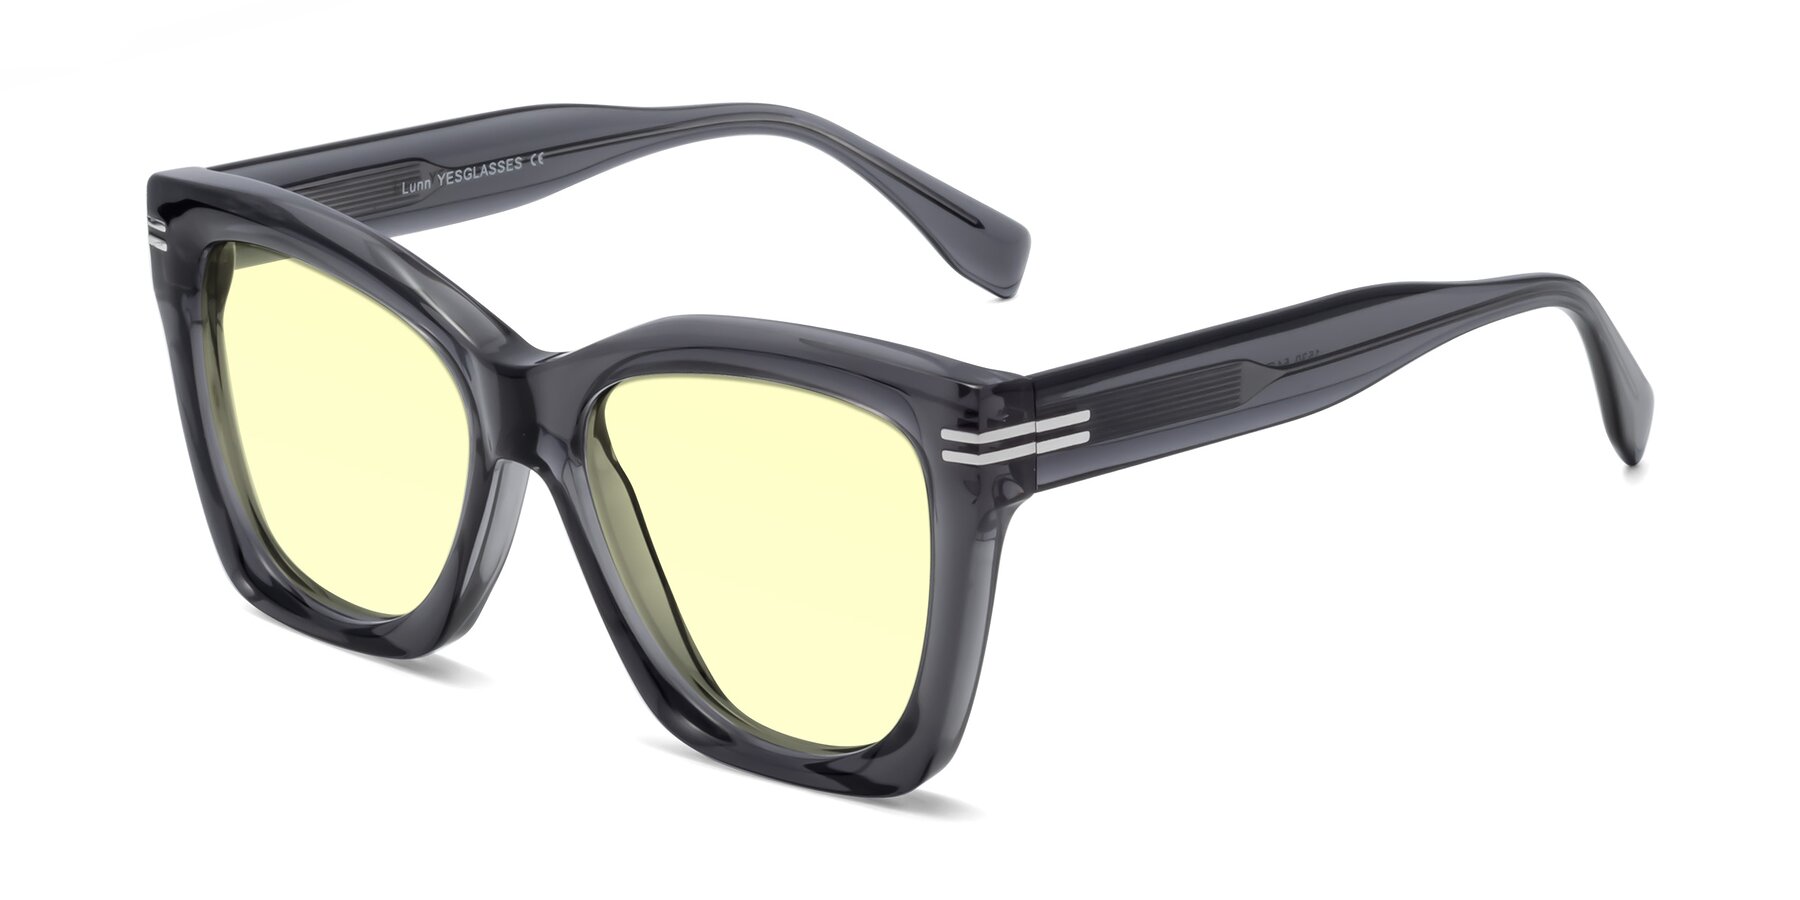 Angle of Lunn in Translucent Gray with Light Yellow Tinted Lenses